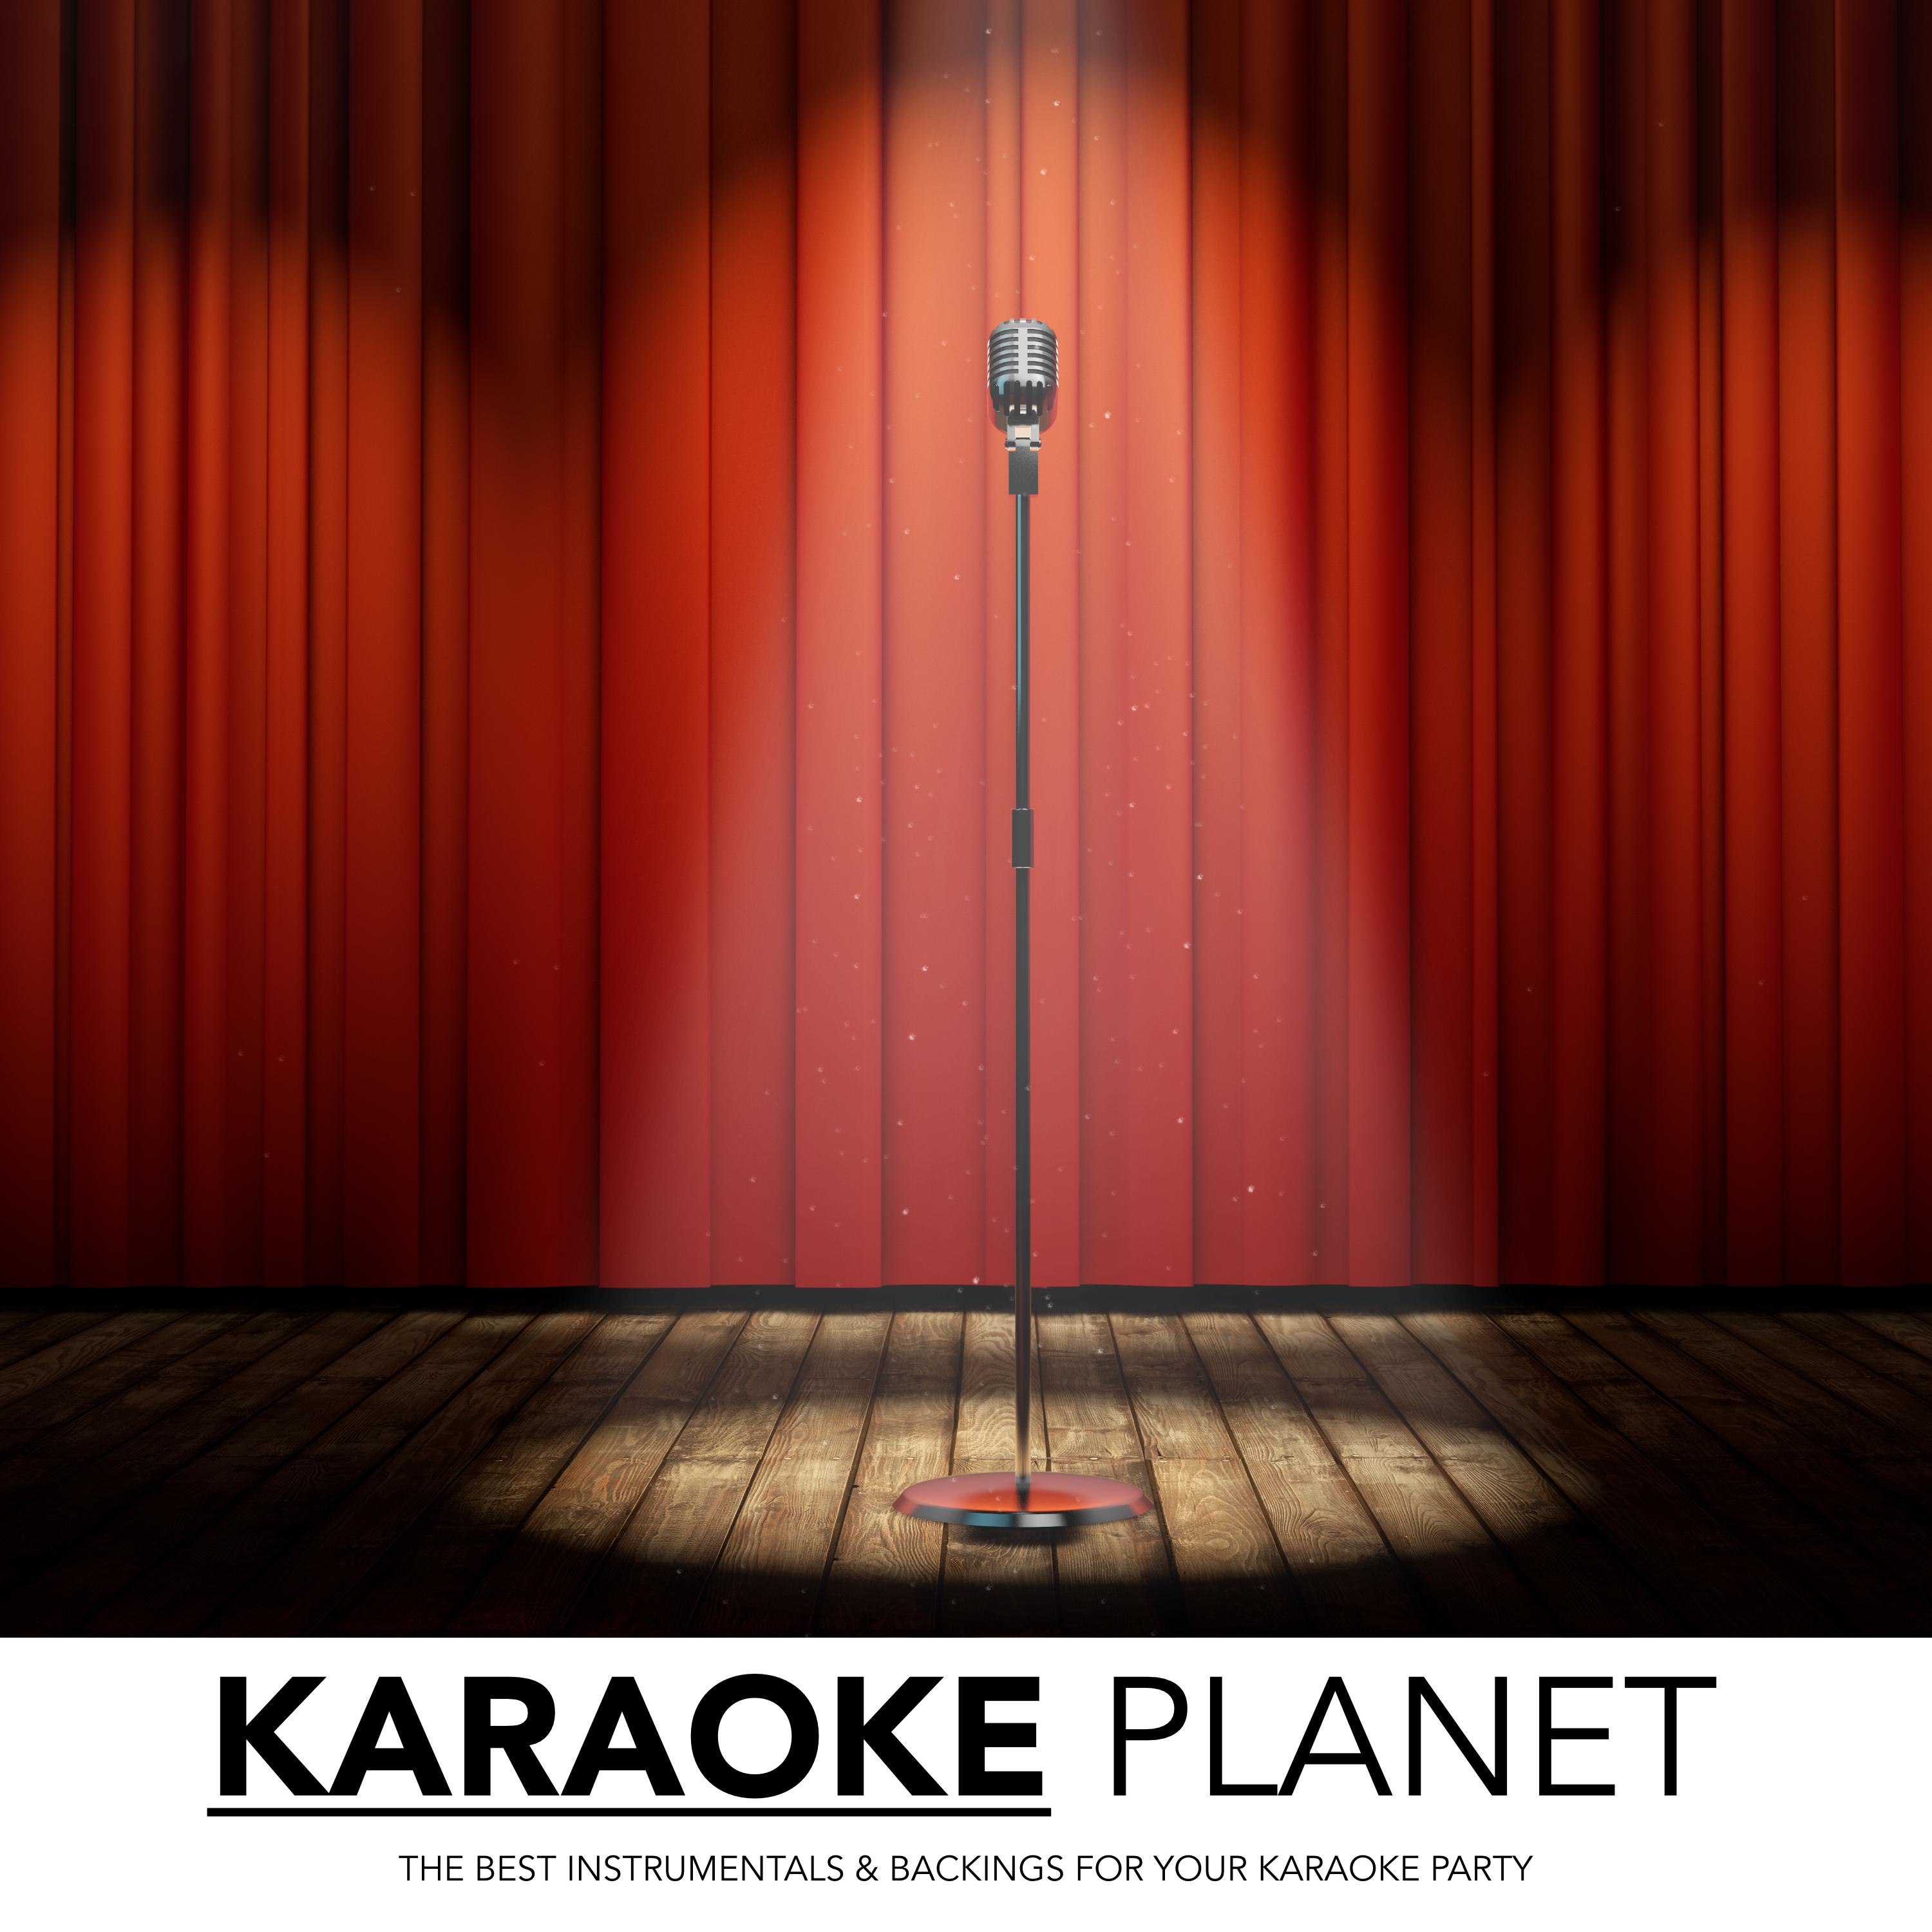 Change Clothes (Karaoke Version) [Originally Performed By Jay-Z]